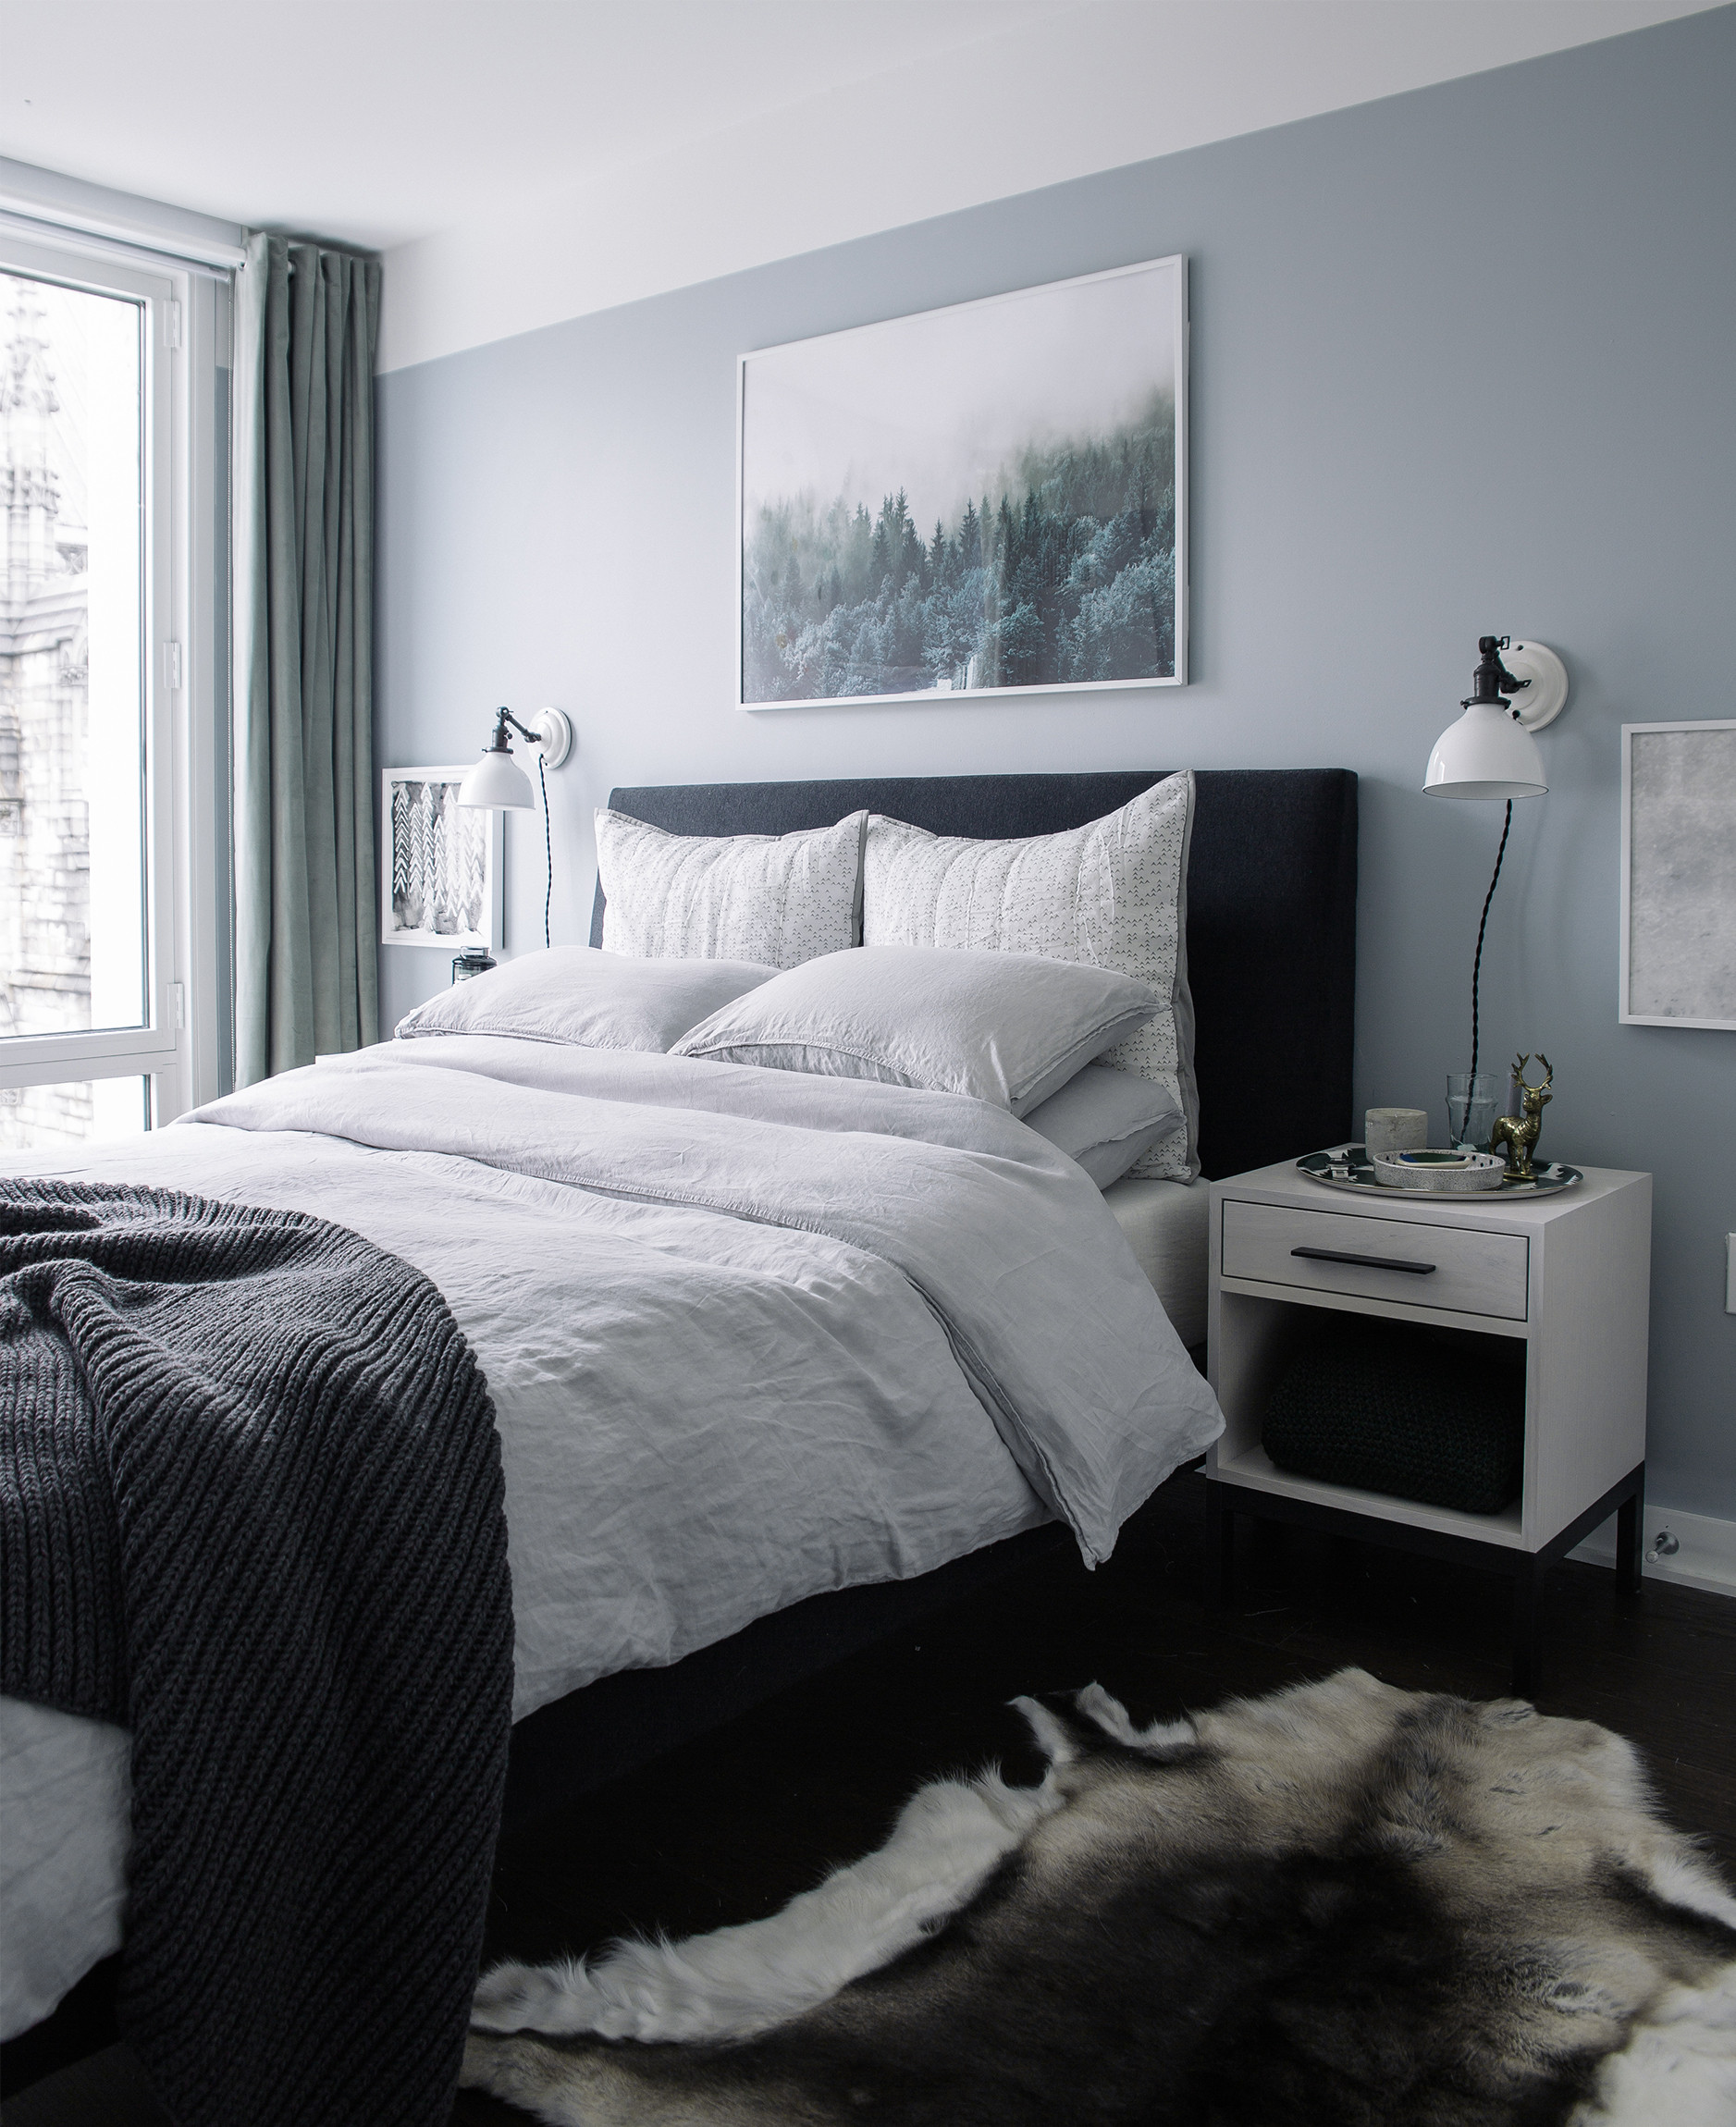 Gray Bedroom Paint
 Bedroom Makeover The Reveal Bright Bazaar by Will Taylor